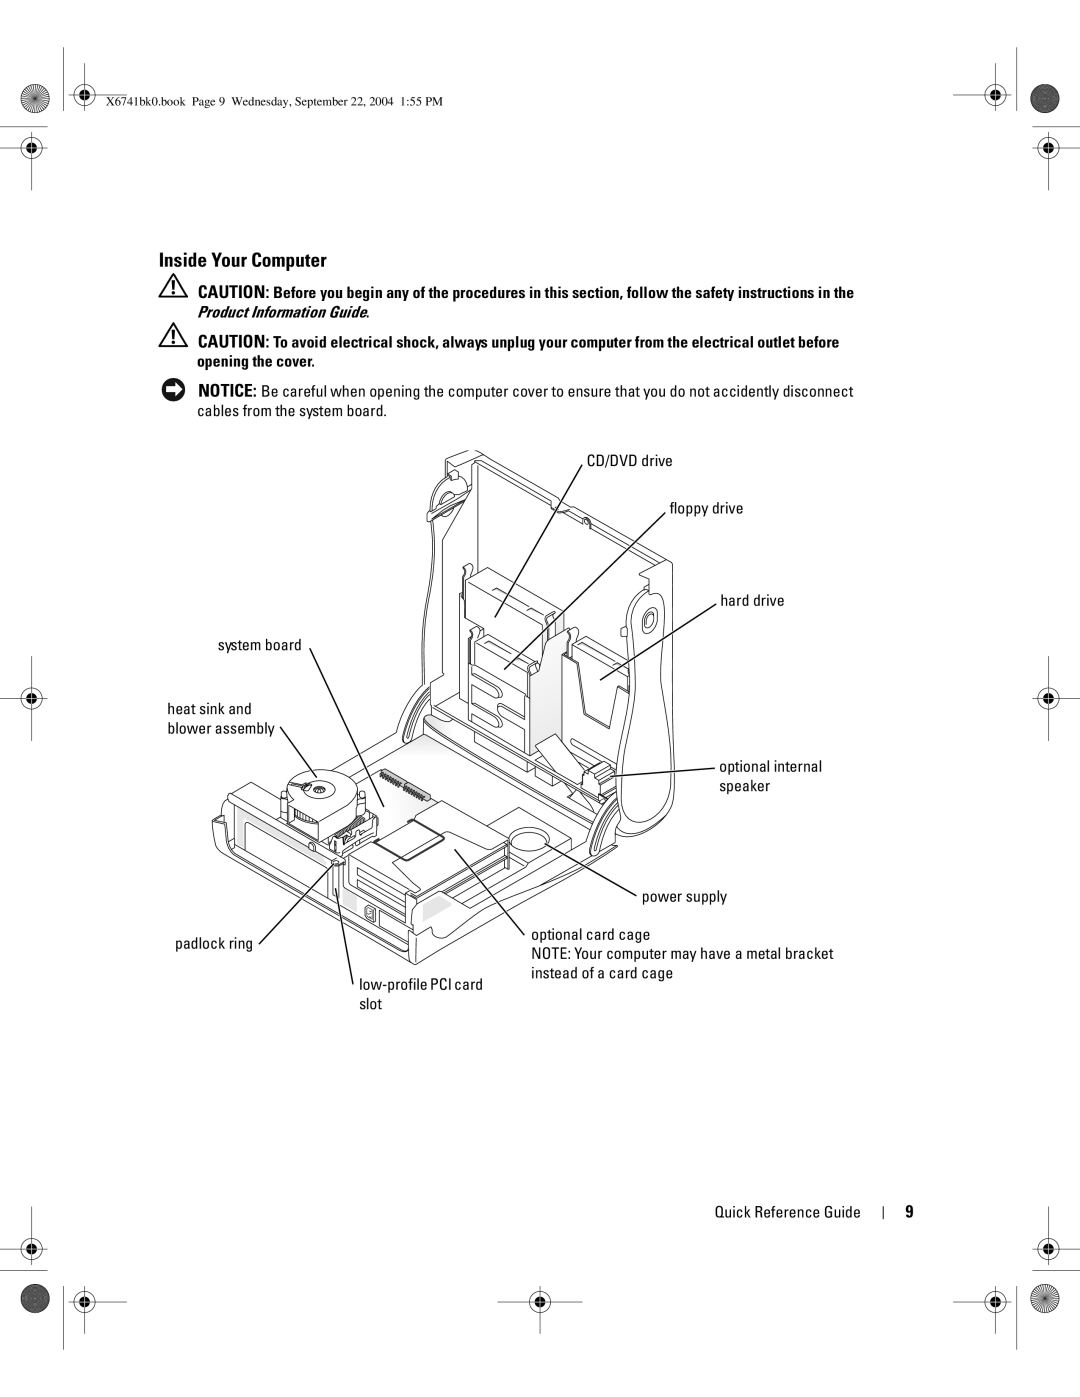 Dell 170L manual Inside Your Computer, heat sink and blower assembly, optional internal speaker 